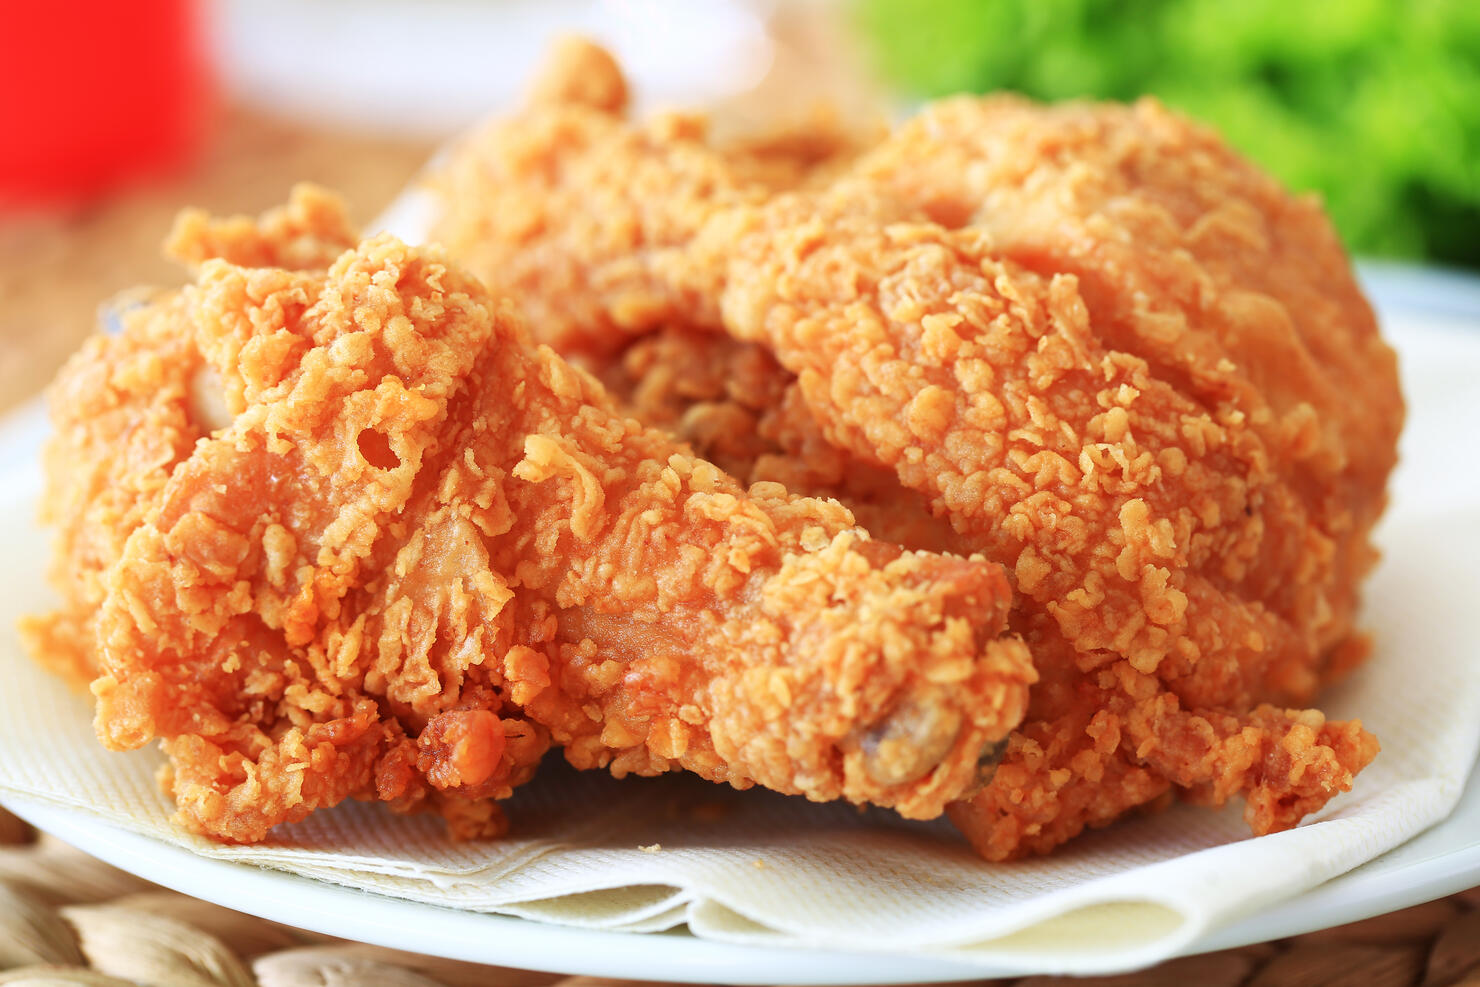 Close-up photo of fried chicken on white plate